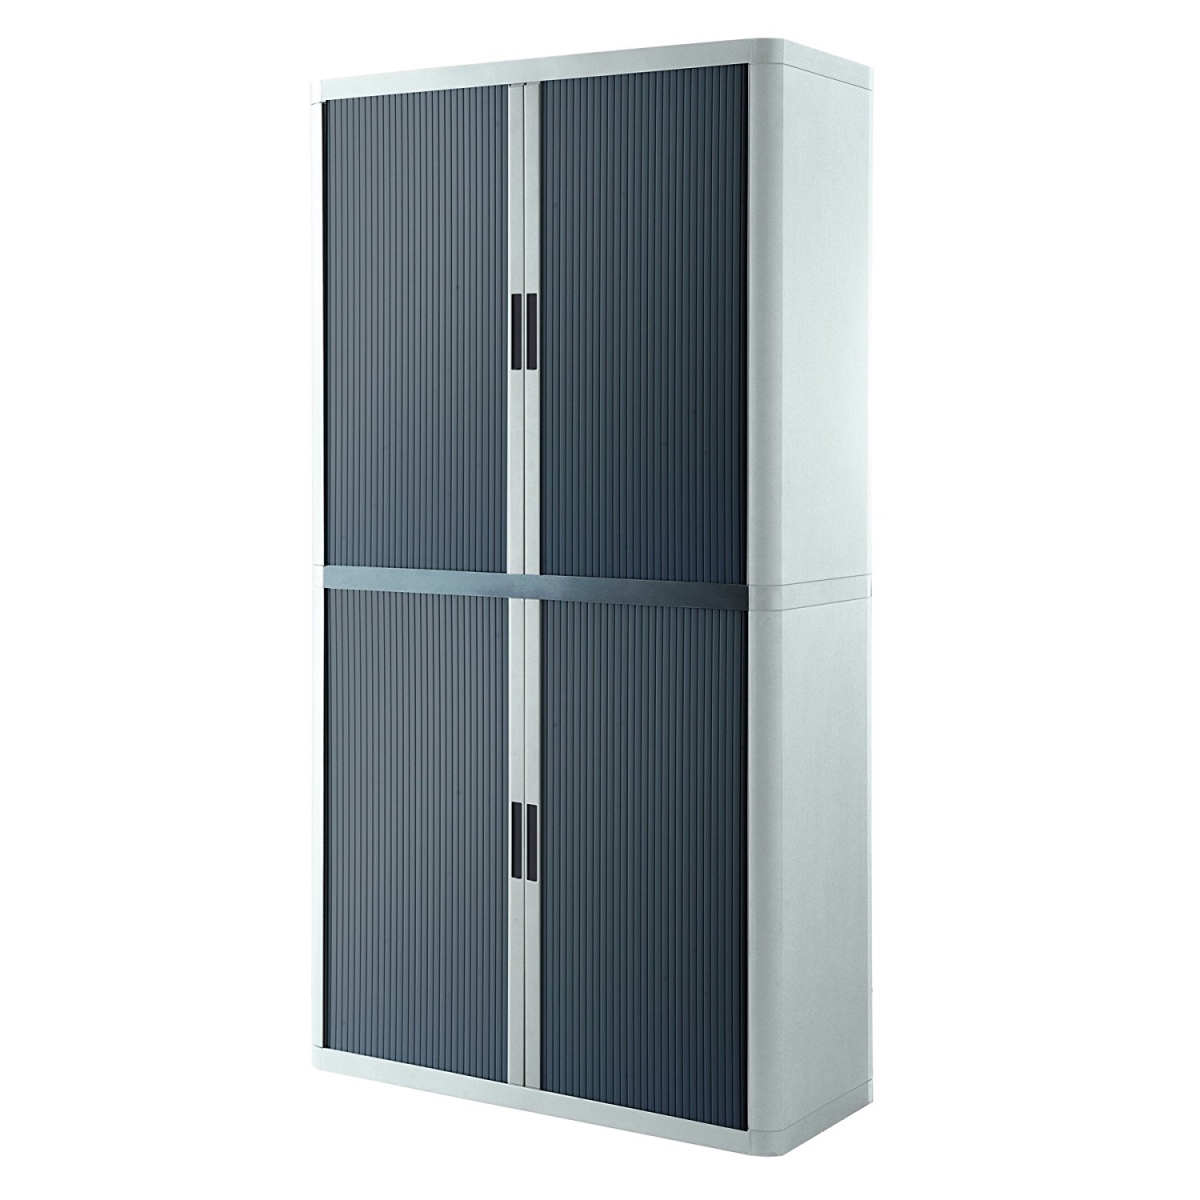 E2ct0009900065 80 In. Easyoffice Storage Cabinet, White & Anthracite